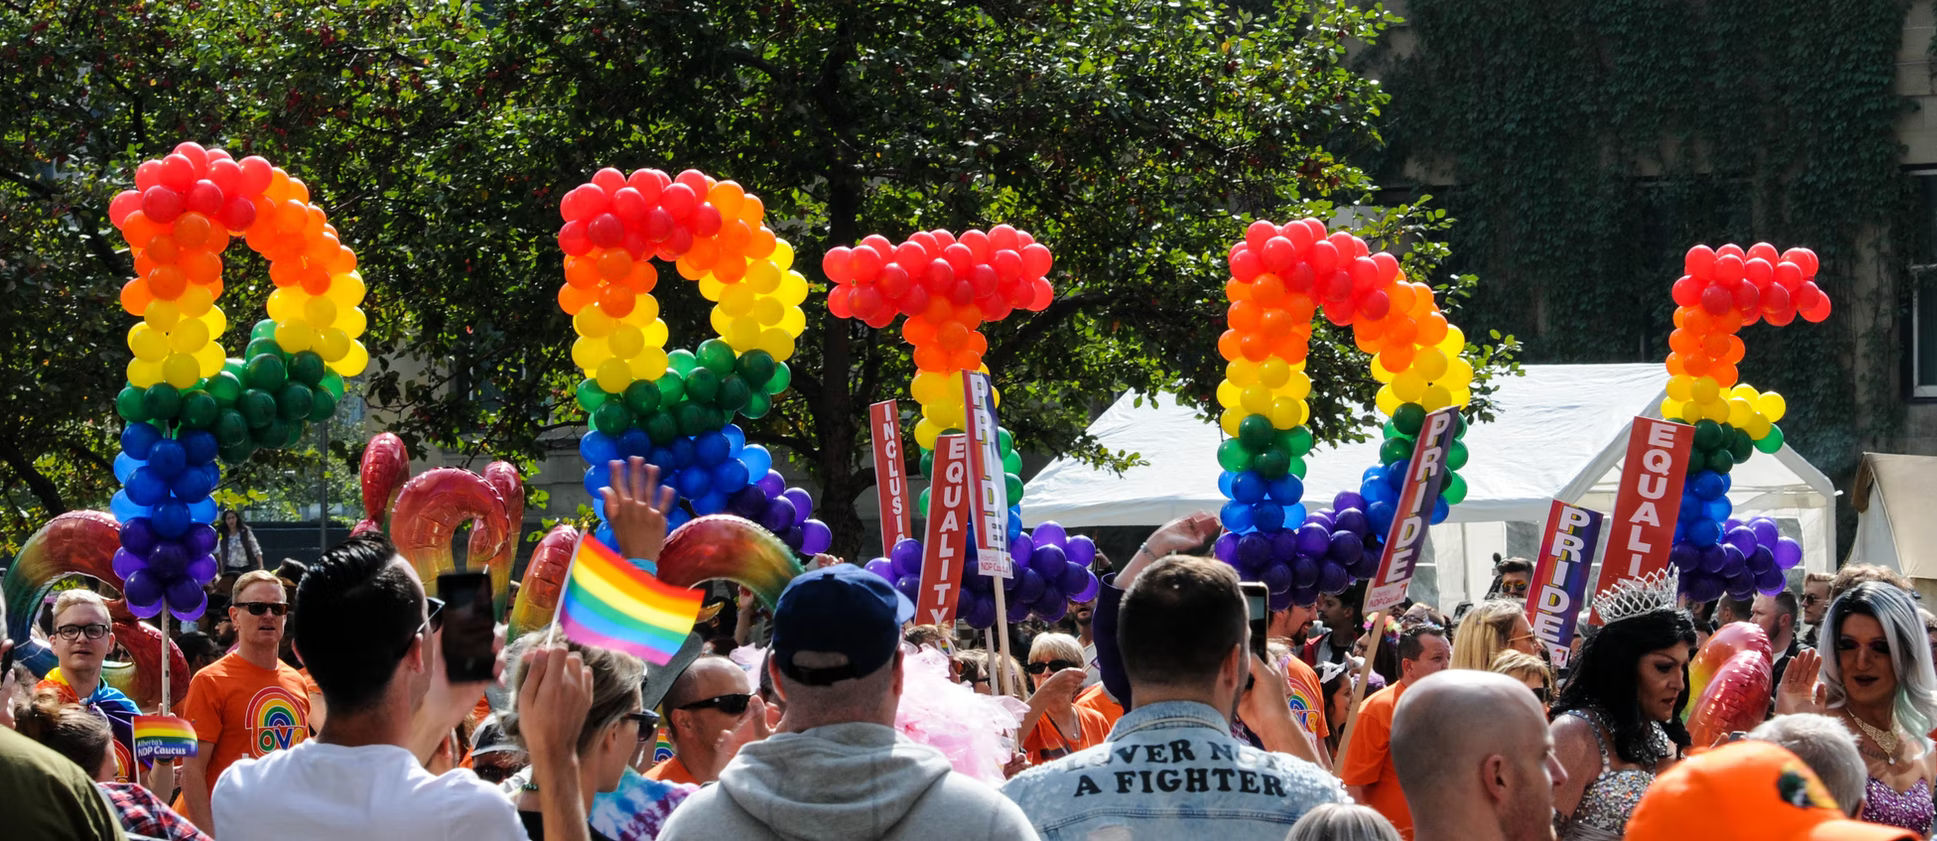 NYC Pride Parade 2022: All you need to know